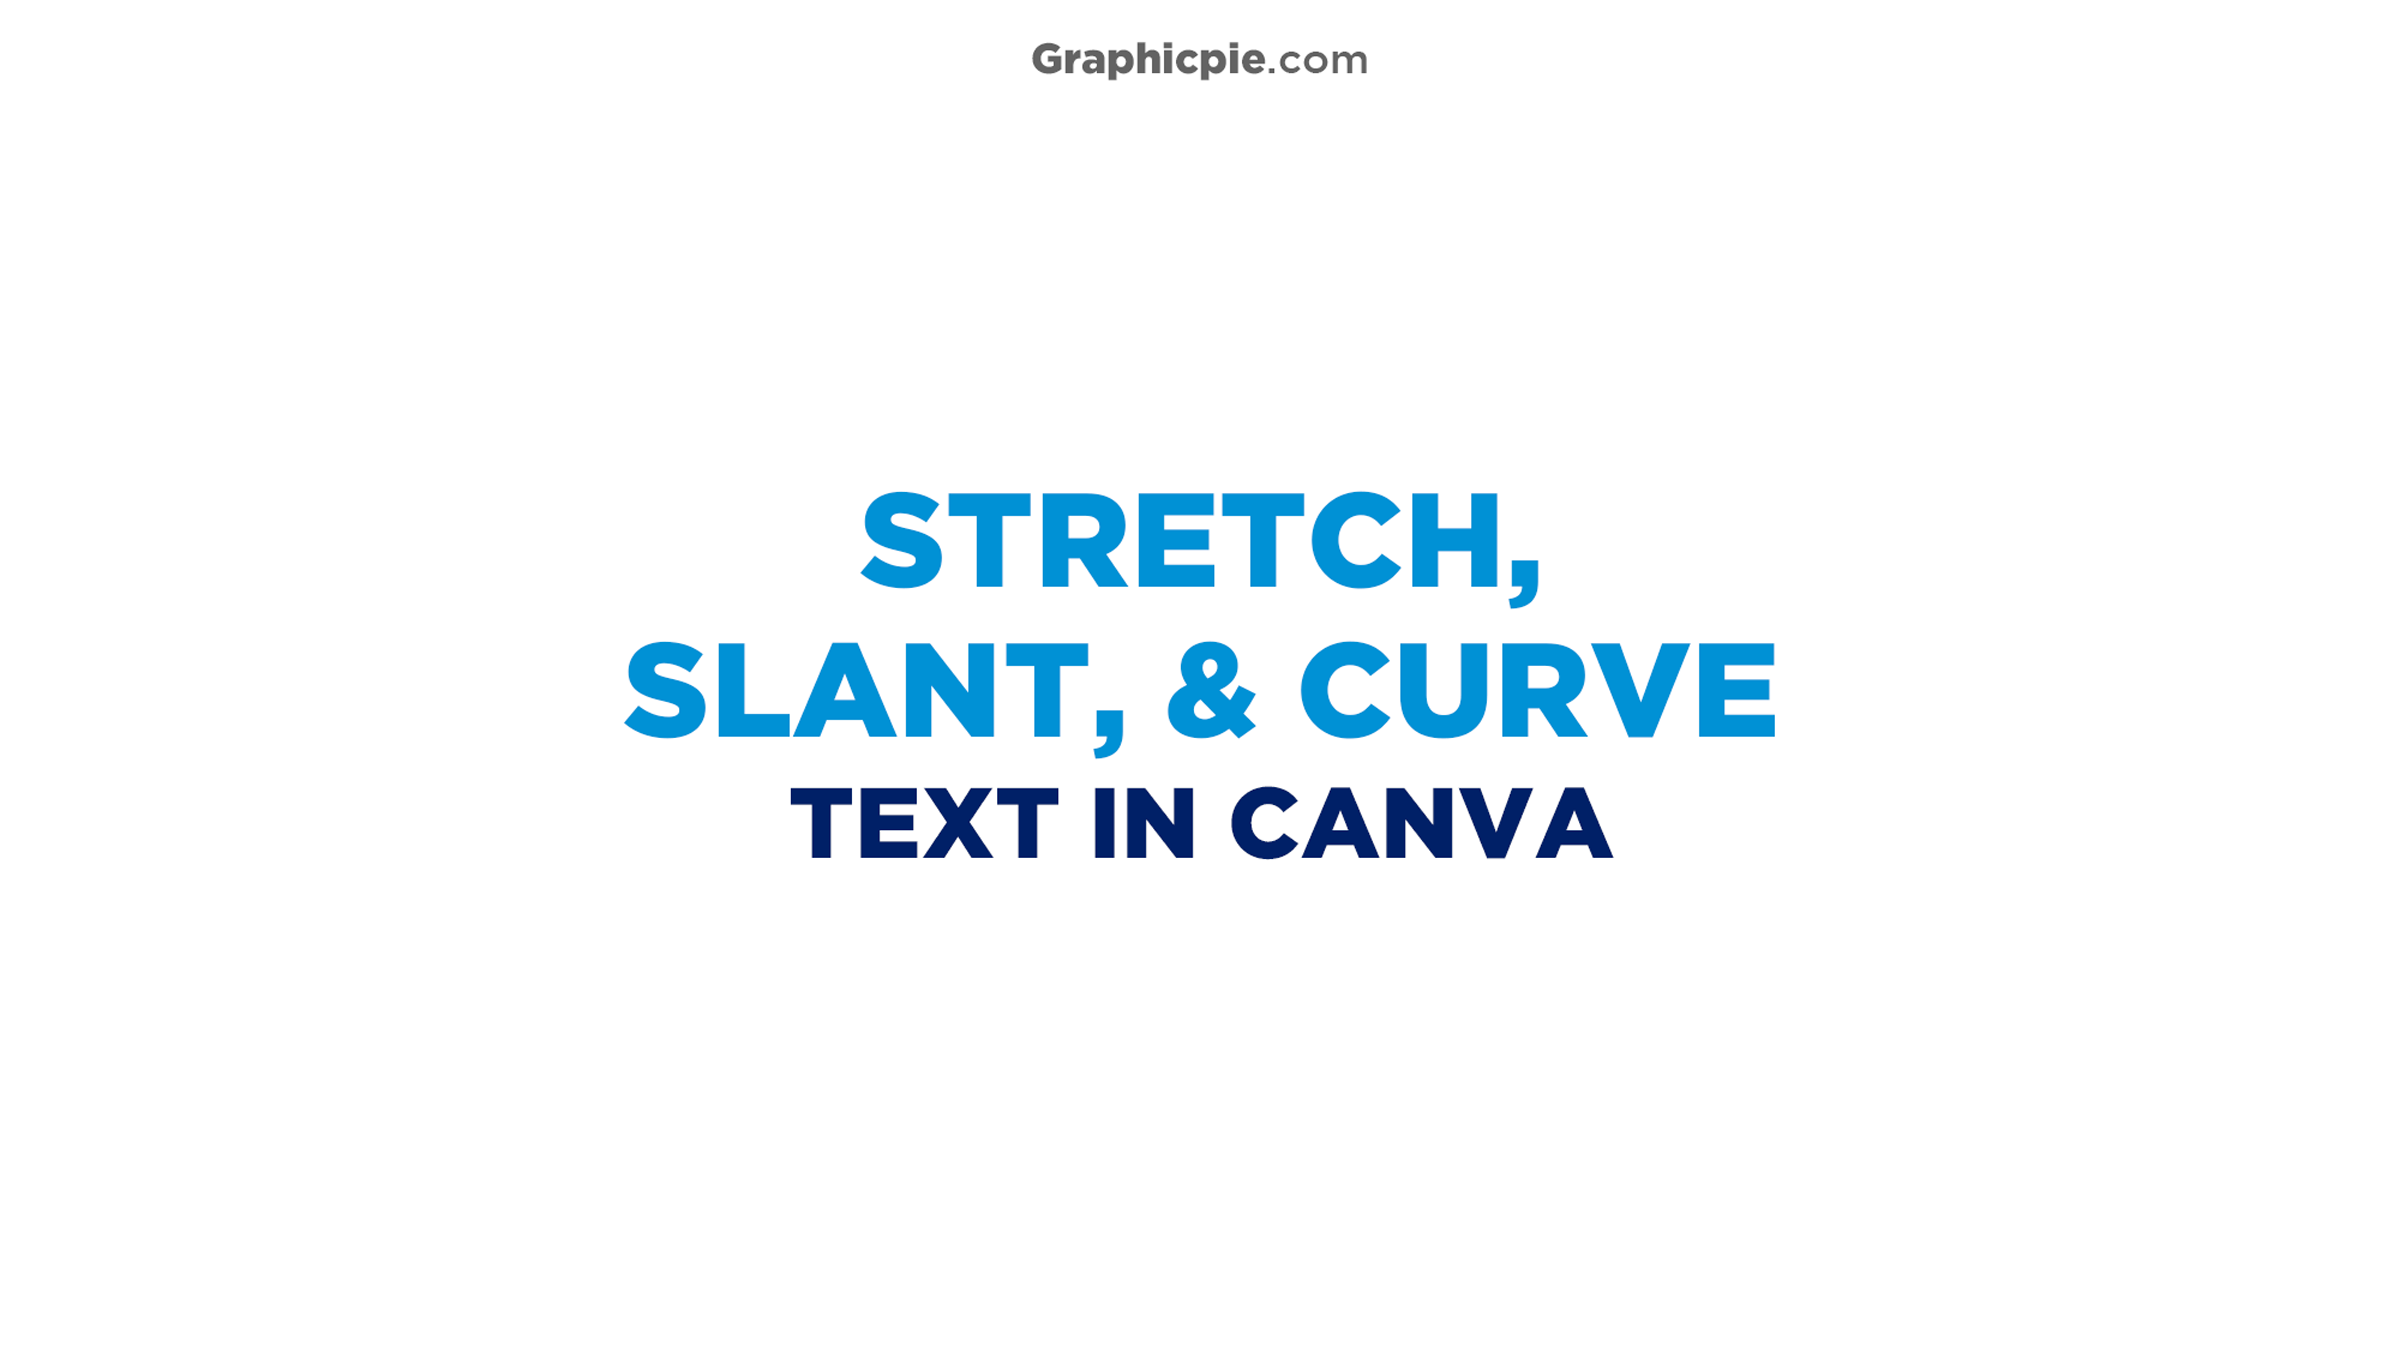 How To Stretch, Slant, & Wrap Text In Canva - Graphic Pie